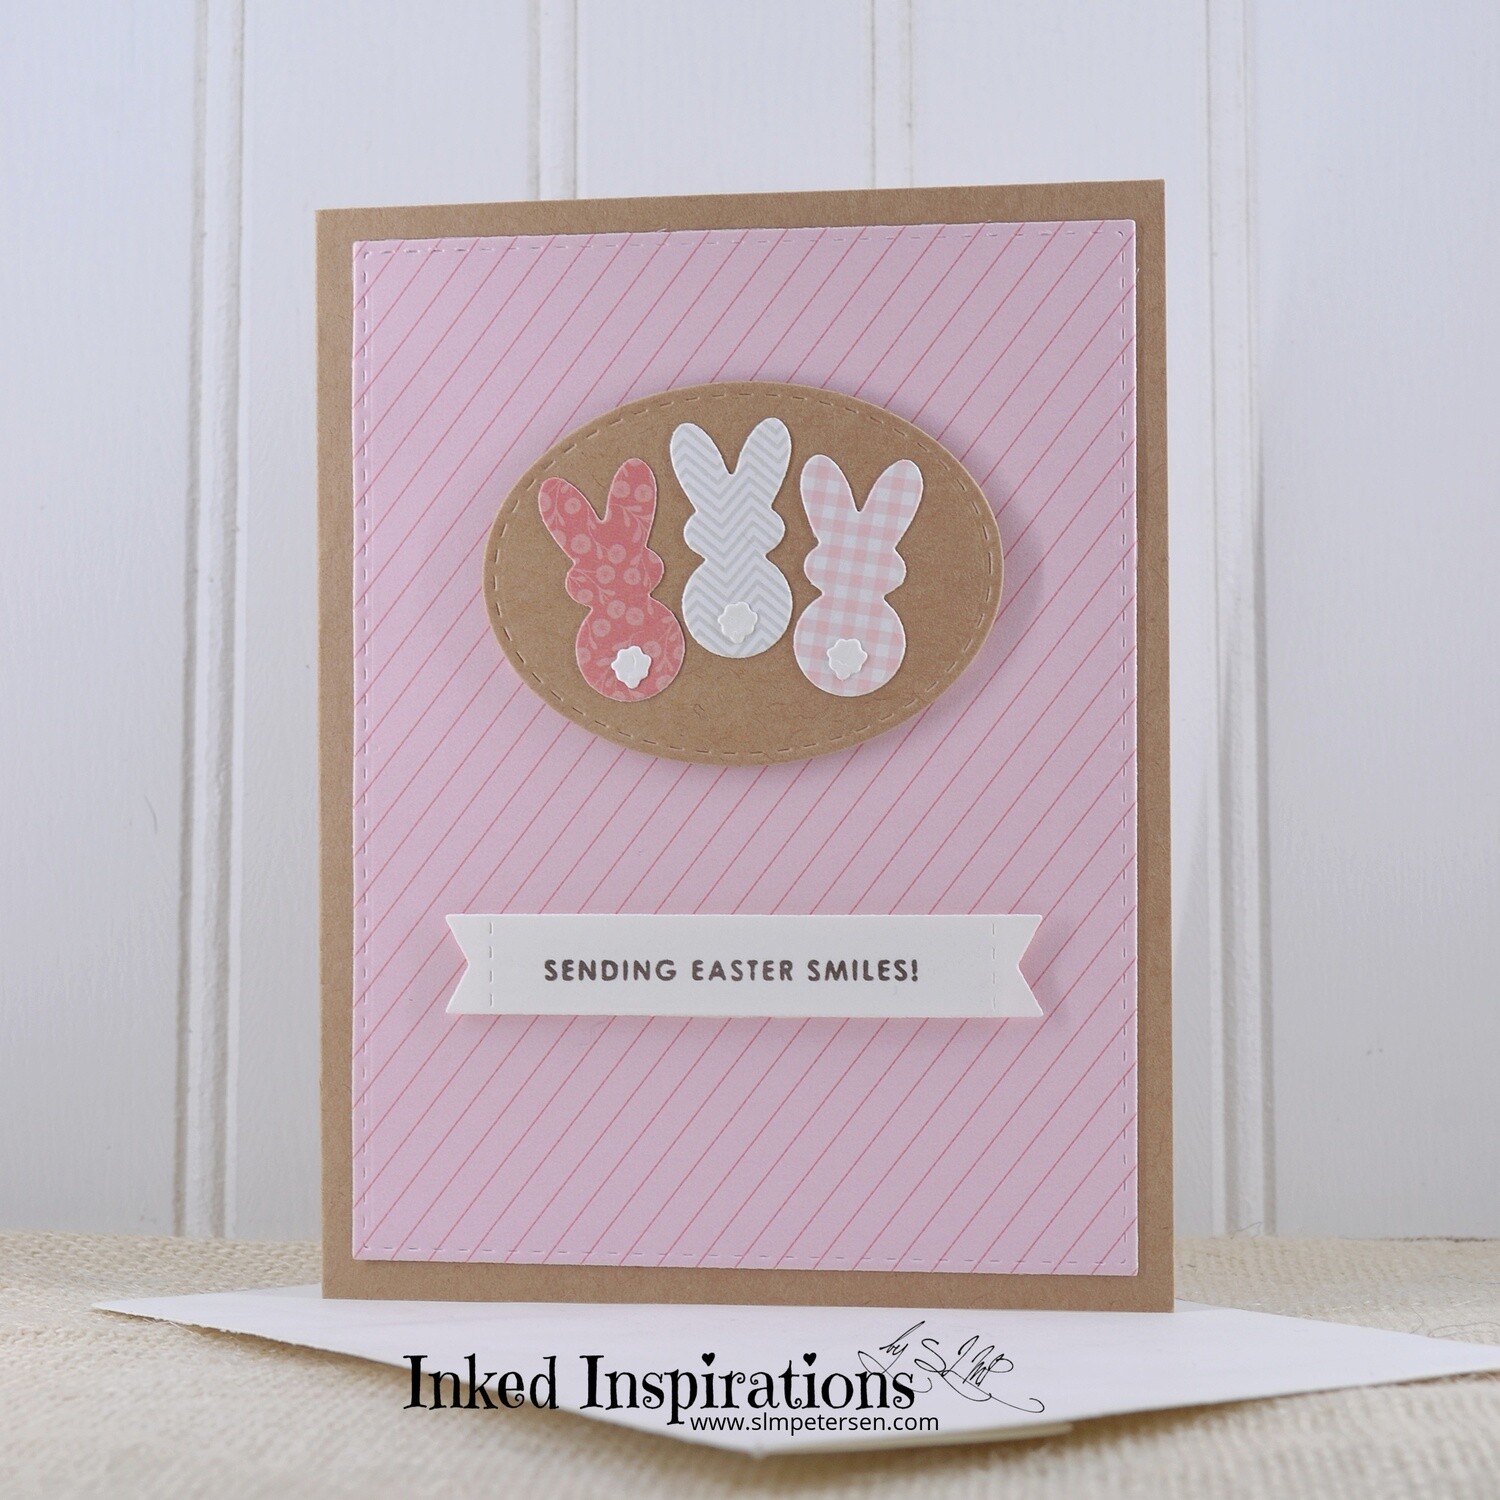 Sending Easter Smiles - Pink with Bunnies